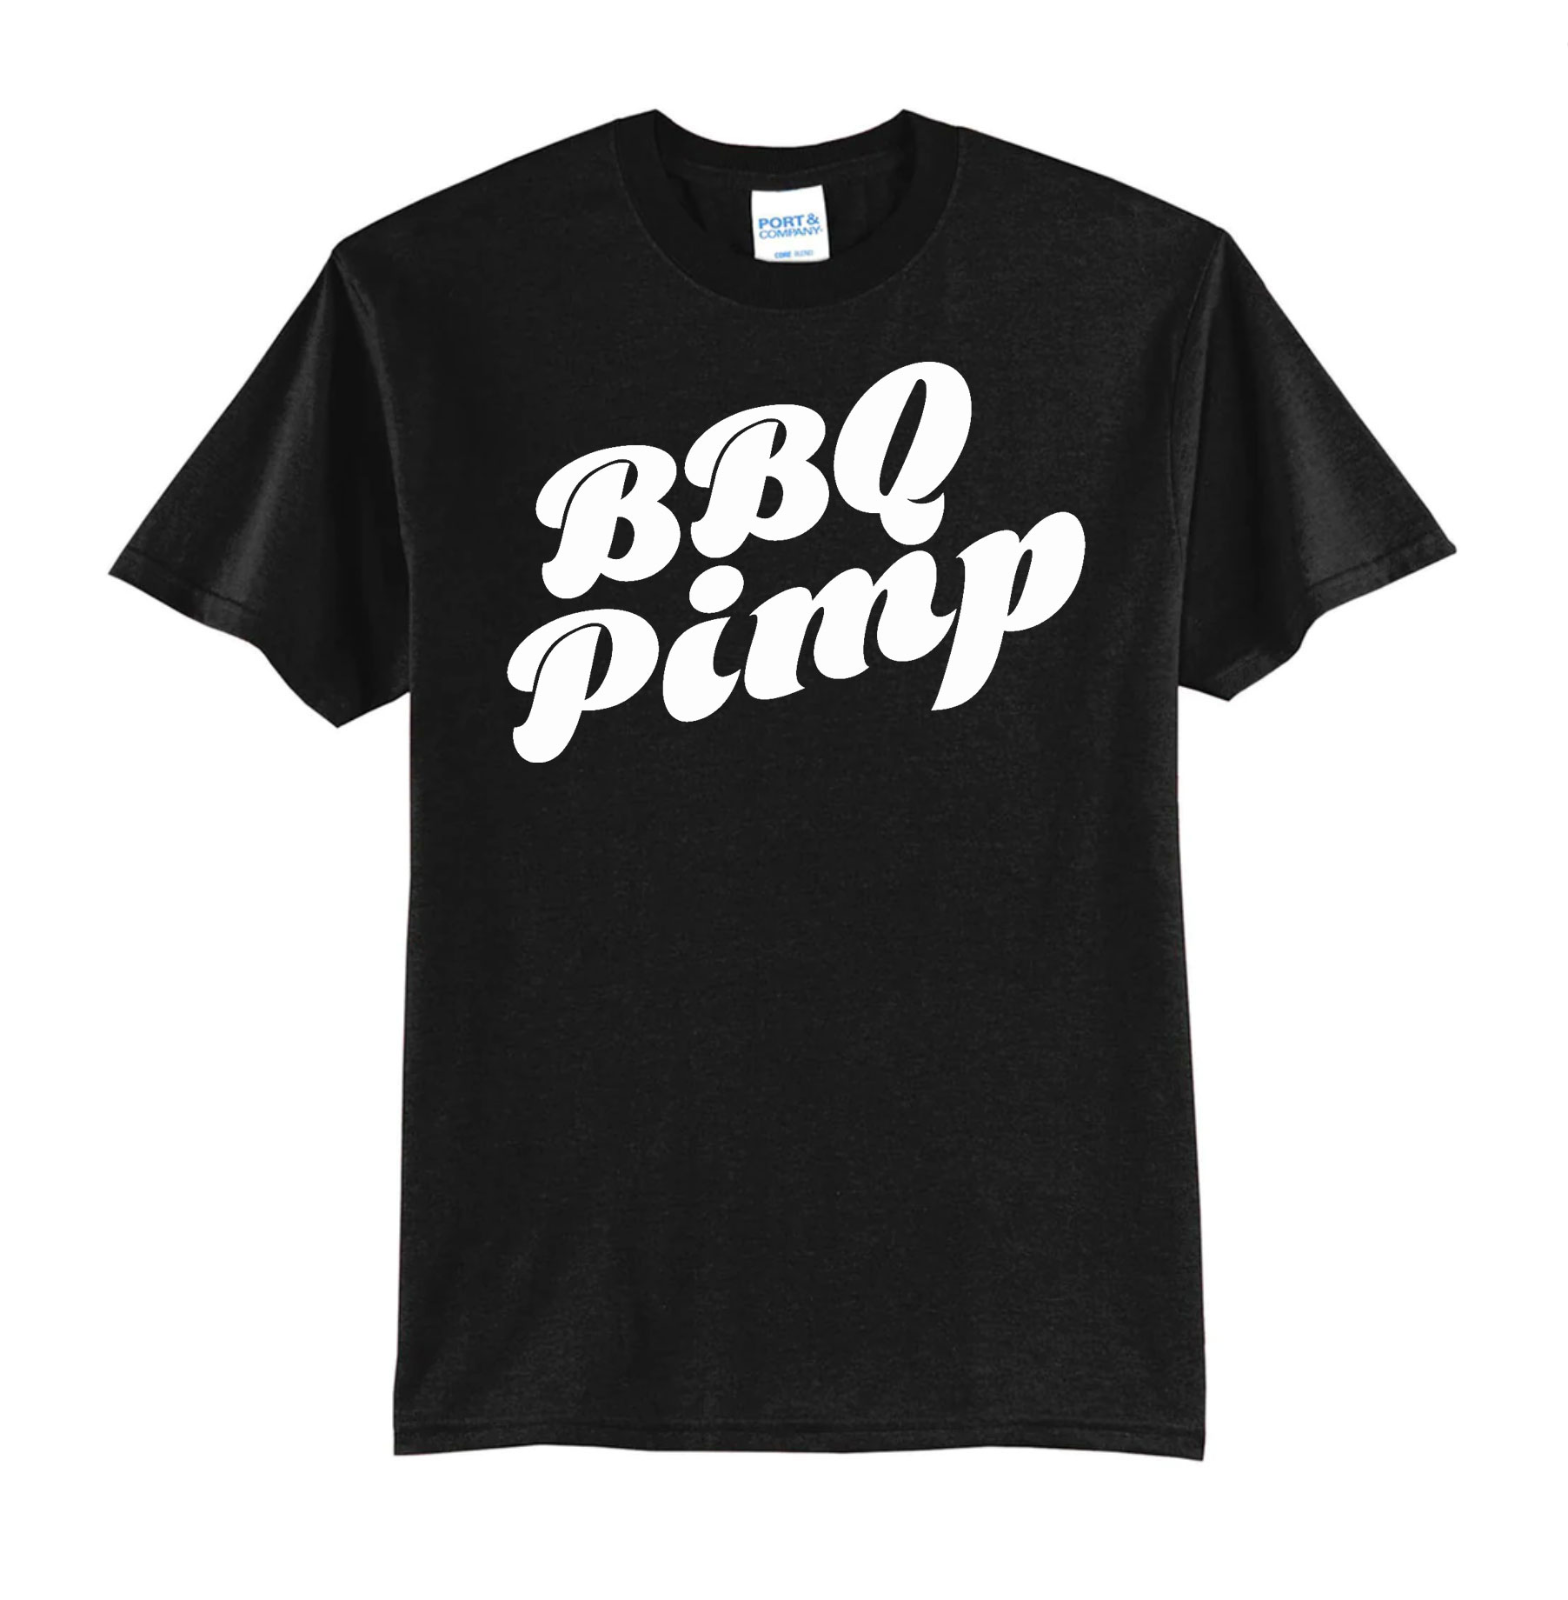 Primary image for BBQ PIMP-NEW T-SHIRT FUNNY-S-M-L-XL-GRILLING-SUMMER